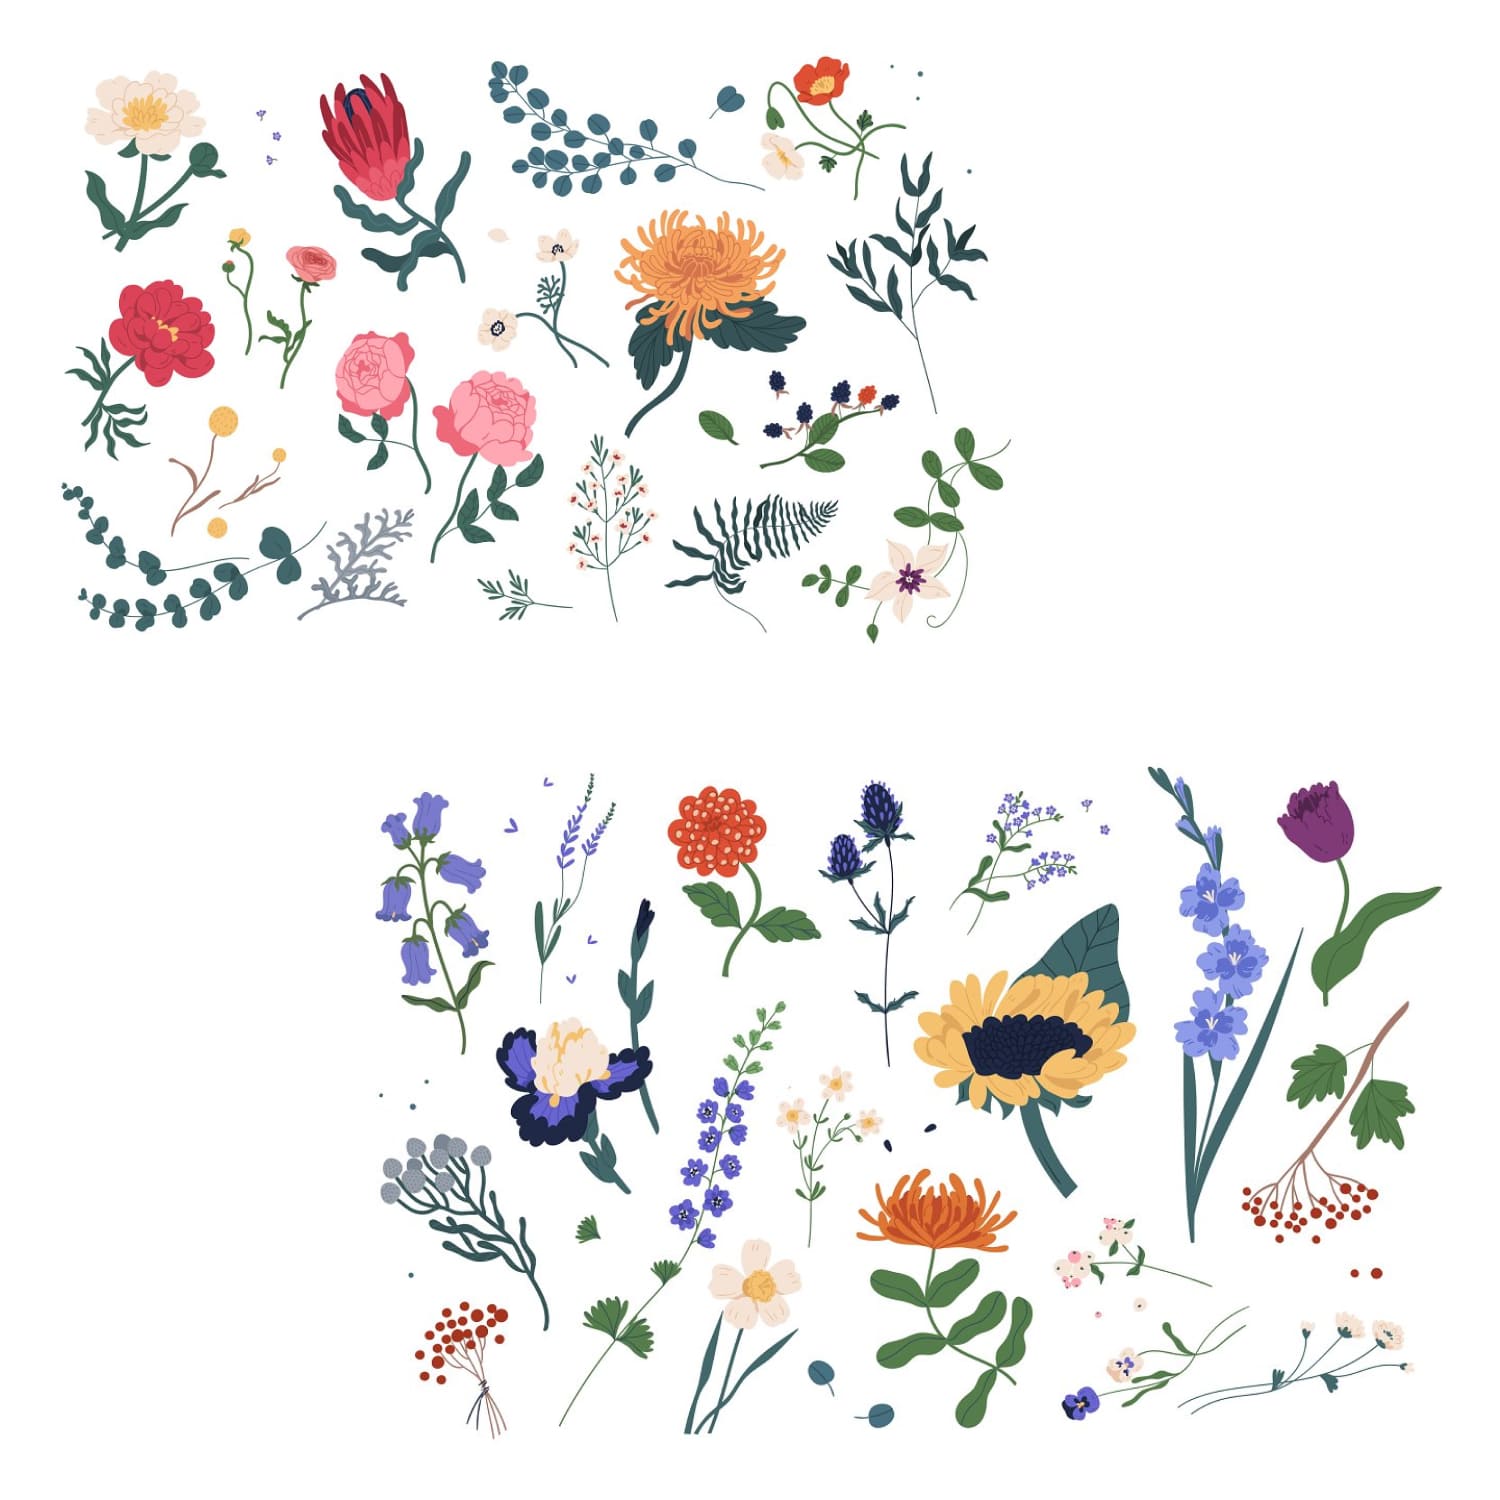 Flowers and herbs collection cover.